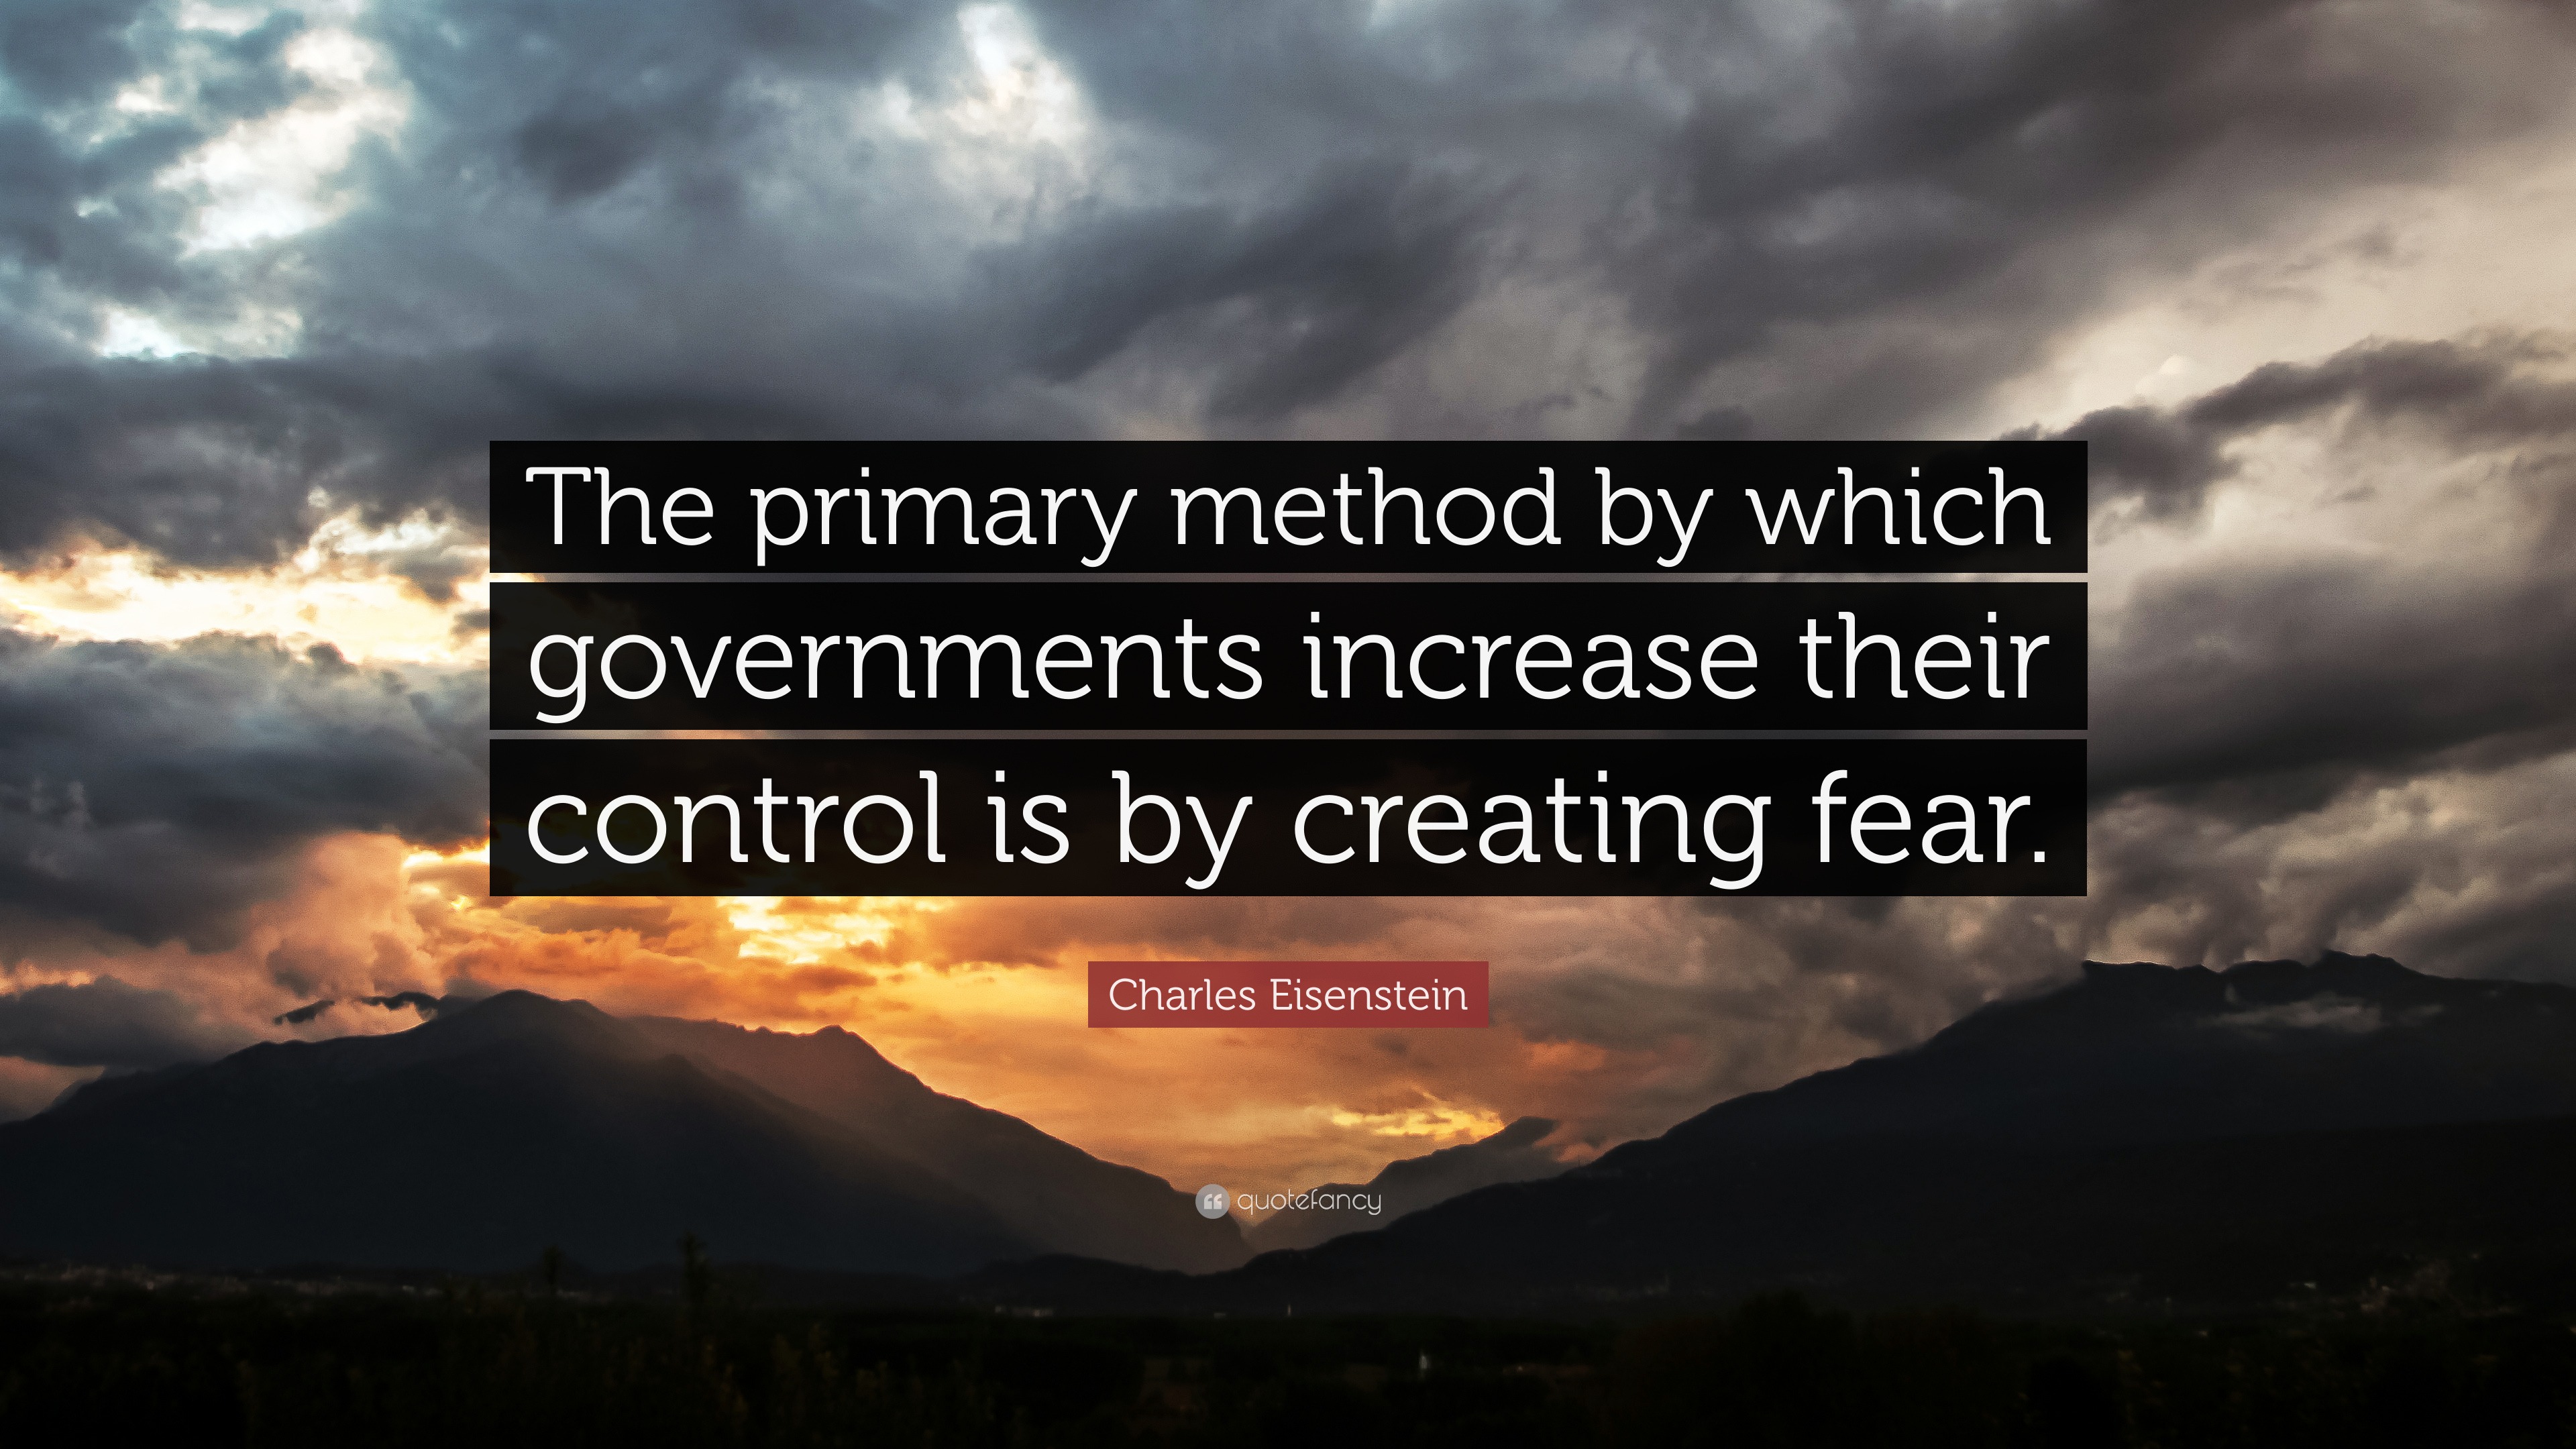 Charles Eisenstein Quote: “The primary method by which governments increase their control is by creating fear.”